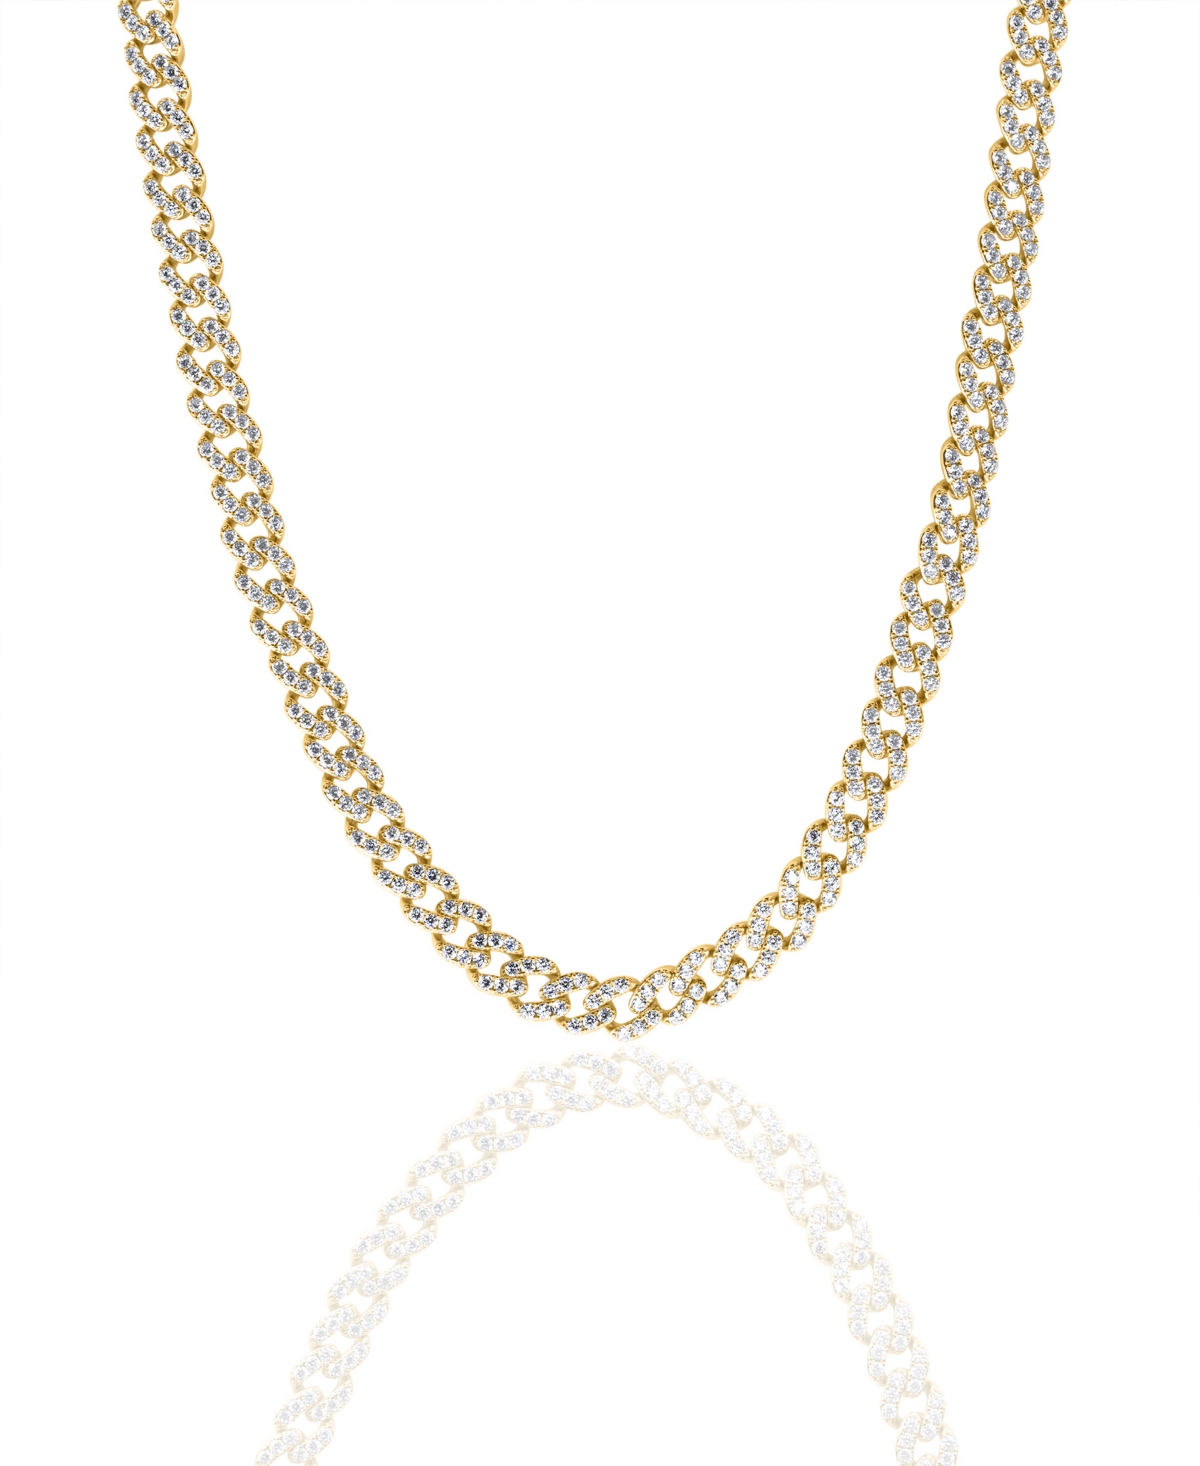 Frosty Link Collection 9mm Necklace in 18K Gold- Plated Brass, 16" - Gold